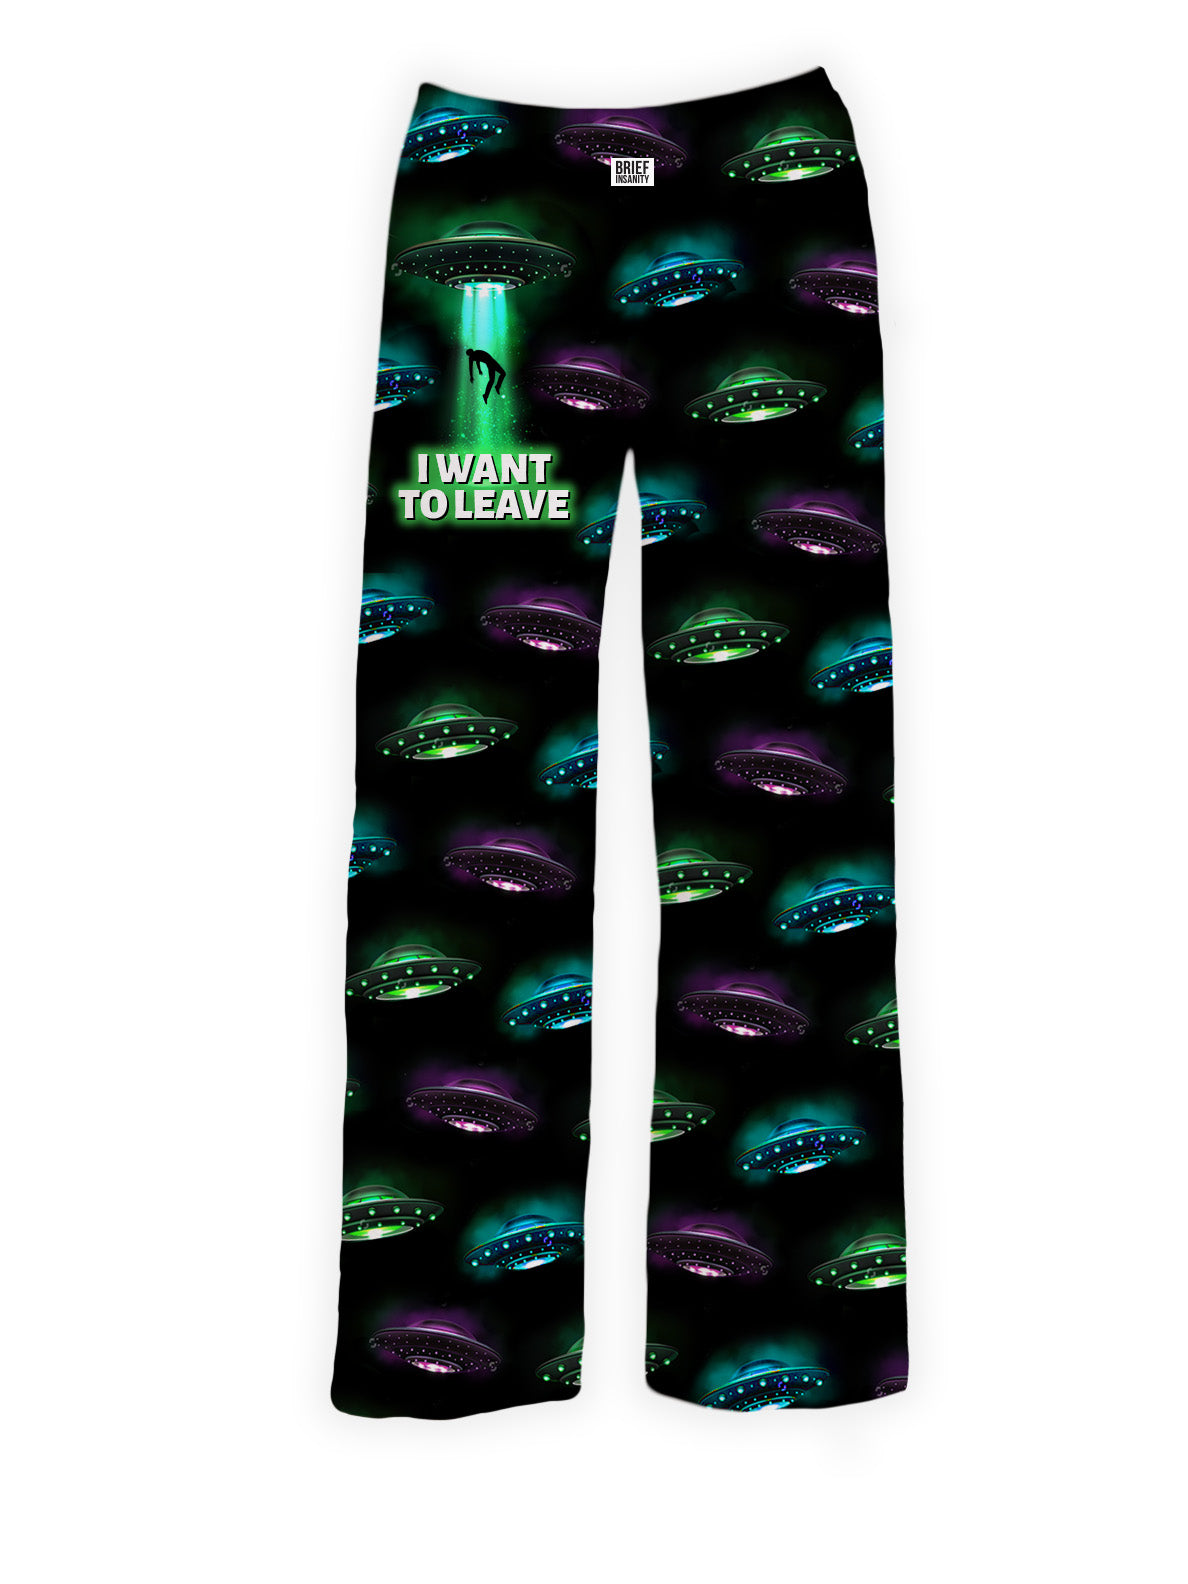 BRIEF INSANITY's Alien I Want To Leave Pajama Lounge Pants